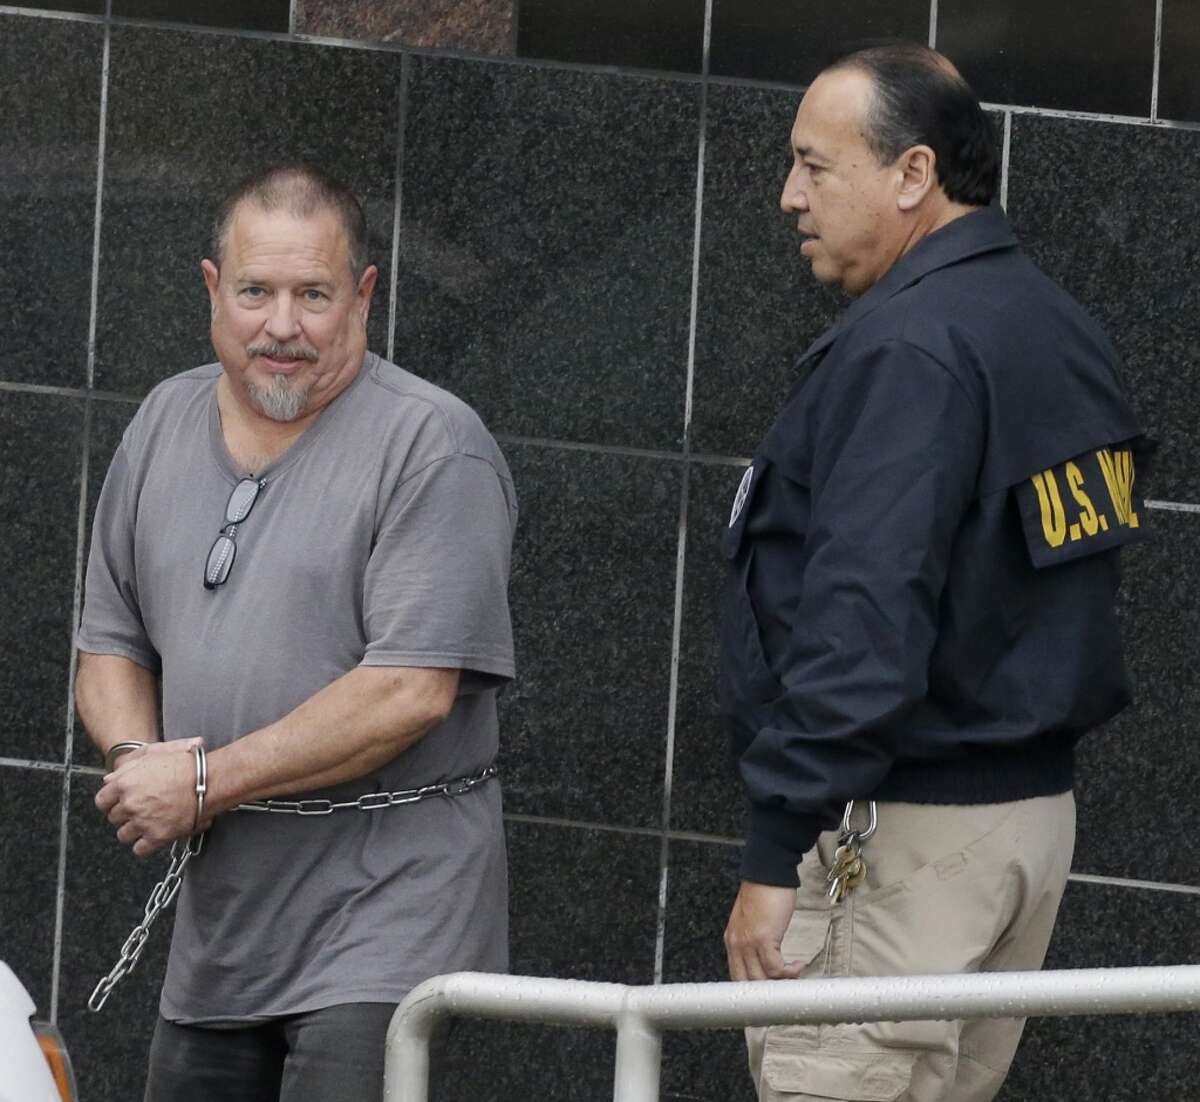 Jeffrey Fay Pike, 60, of Conroe, the national president of the Bandidos Motorcycle Club, is escorted from the Bob Casey Federal Courthouse, 515 Rusk, after an appearance in federal court, where he faced several charges related to his alleged activity with the Bandidos Motorcycle Club shown Wednesday, Jan. 6, 2016, in Houston. ( Melissa Phillip / Houston Chronicle ) Jeffrey Ray Pike is escorted by a U. S. Marshal after an appearance in federal court, where he faced several charges related to his alleged activity with the Bandidos Motorcycle Club Wednesday, Jan. 6, 2016, in Houston. ( Melissa Phillip / Houston Chronicle )